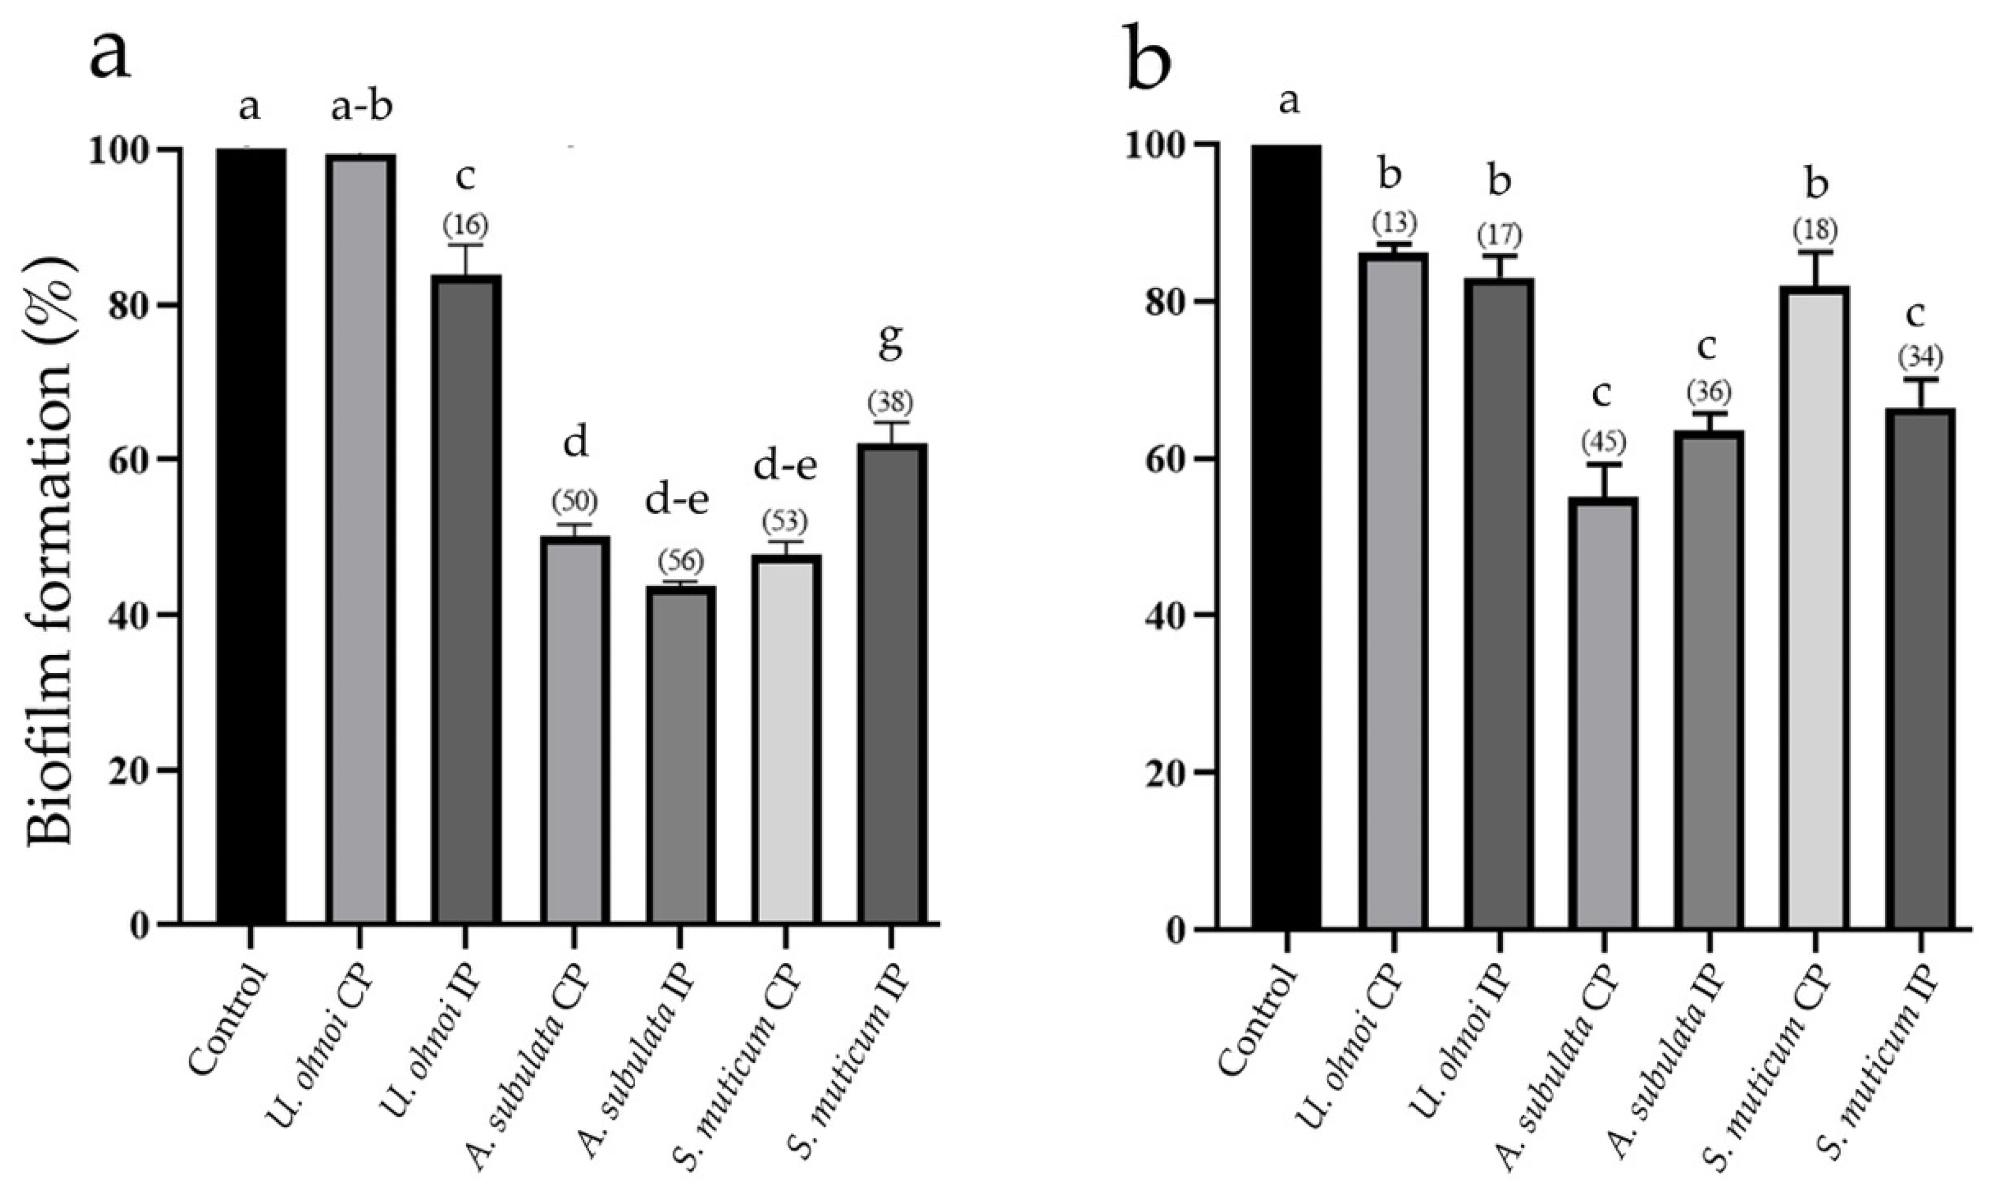 Biofilm formation (%) of (a) Pseudomonas aeruginosa ATCC 27853 and (b) Staphylococcus aureus ATCC 29213 in the absence (control, C) or in the presence of the crude extract from Ulva ohnoi, Agardhiella subulata and Sargassum muticum (400 µg mL-1 w/v) obtained using the traditional (CP) and innovative (IP) extraction methods. Data represent mean ± SD for six replicates (n = 6). The lowercase letters above the bars denote groups that were found to be significantly different after ANOVA followed by Tukey test. In brackets are data on biofilm reduction as a percentage.